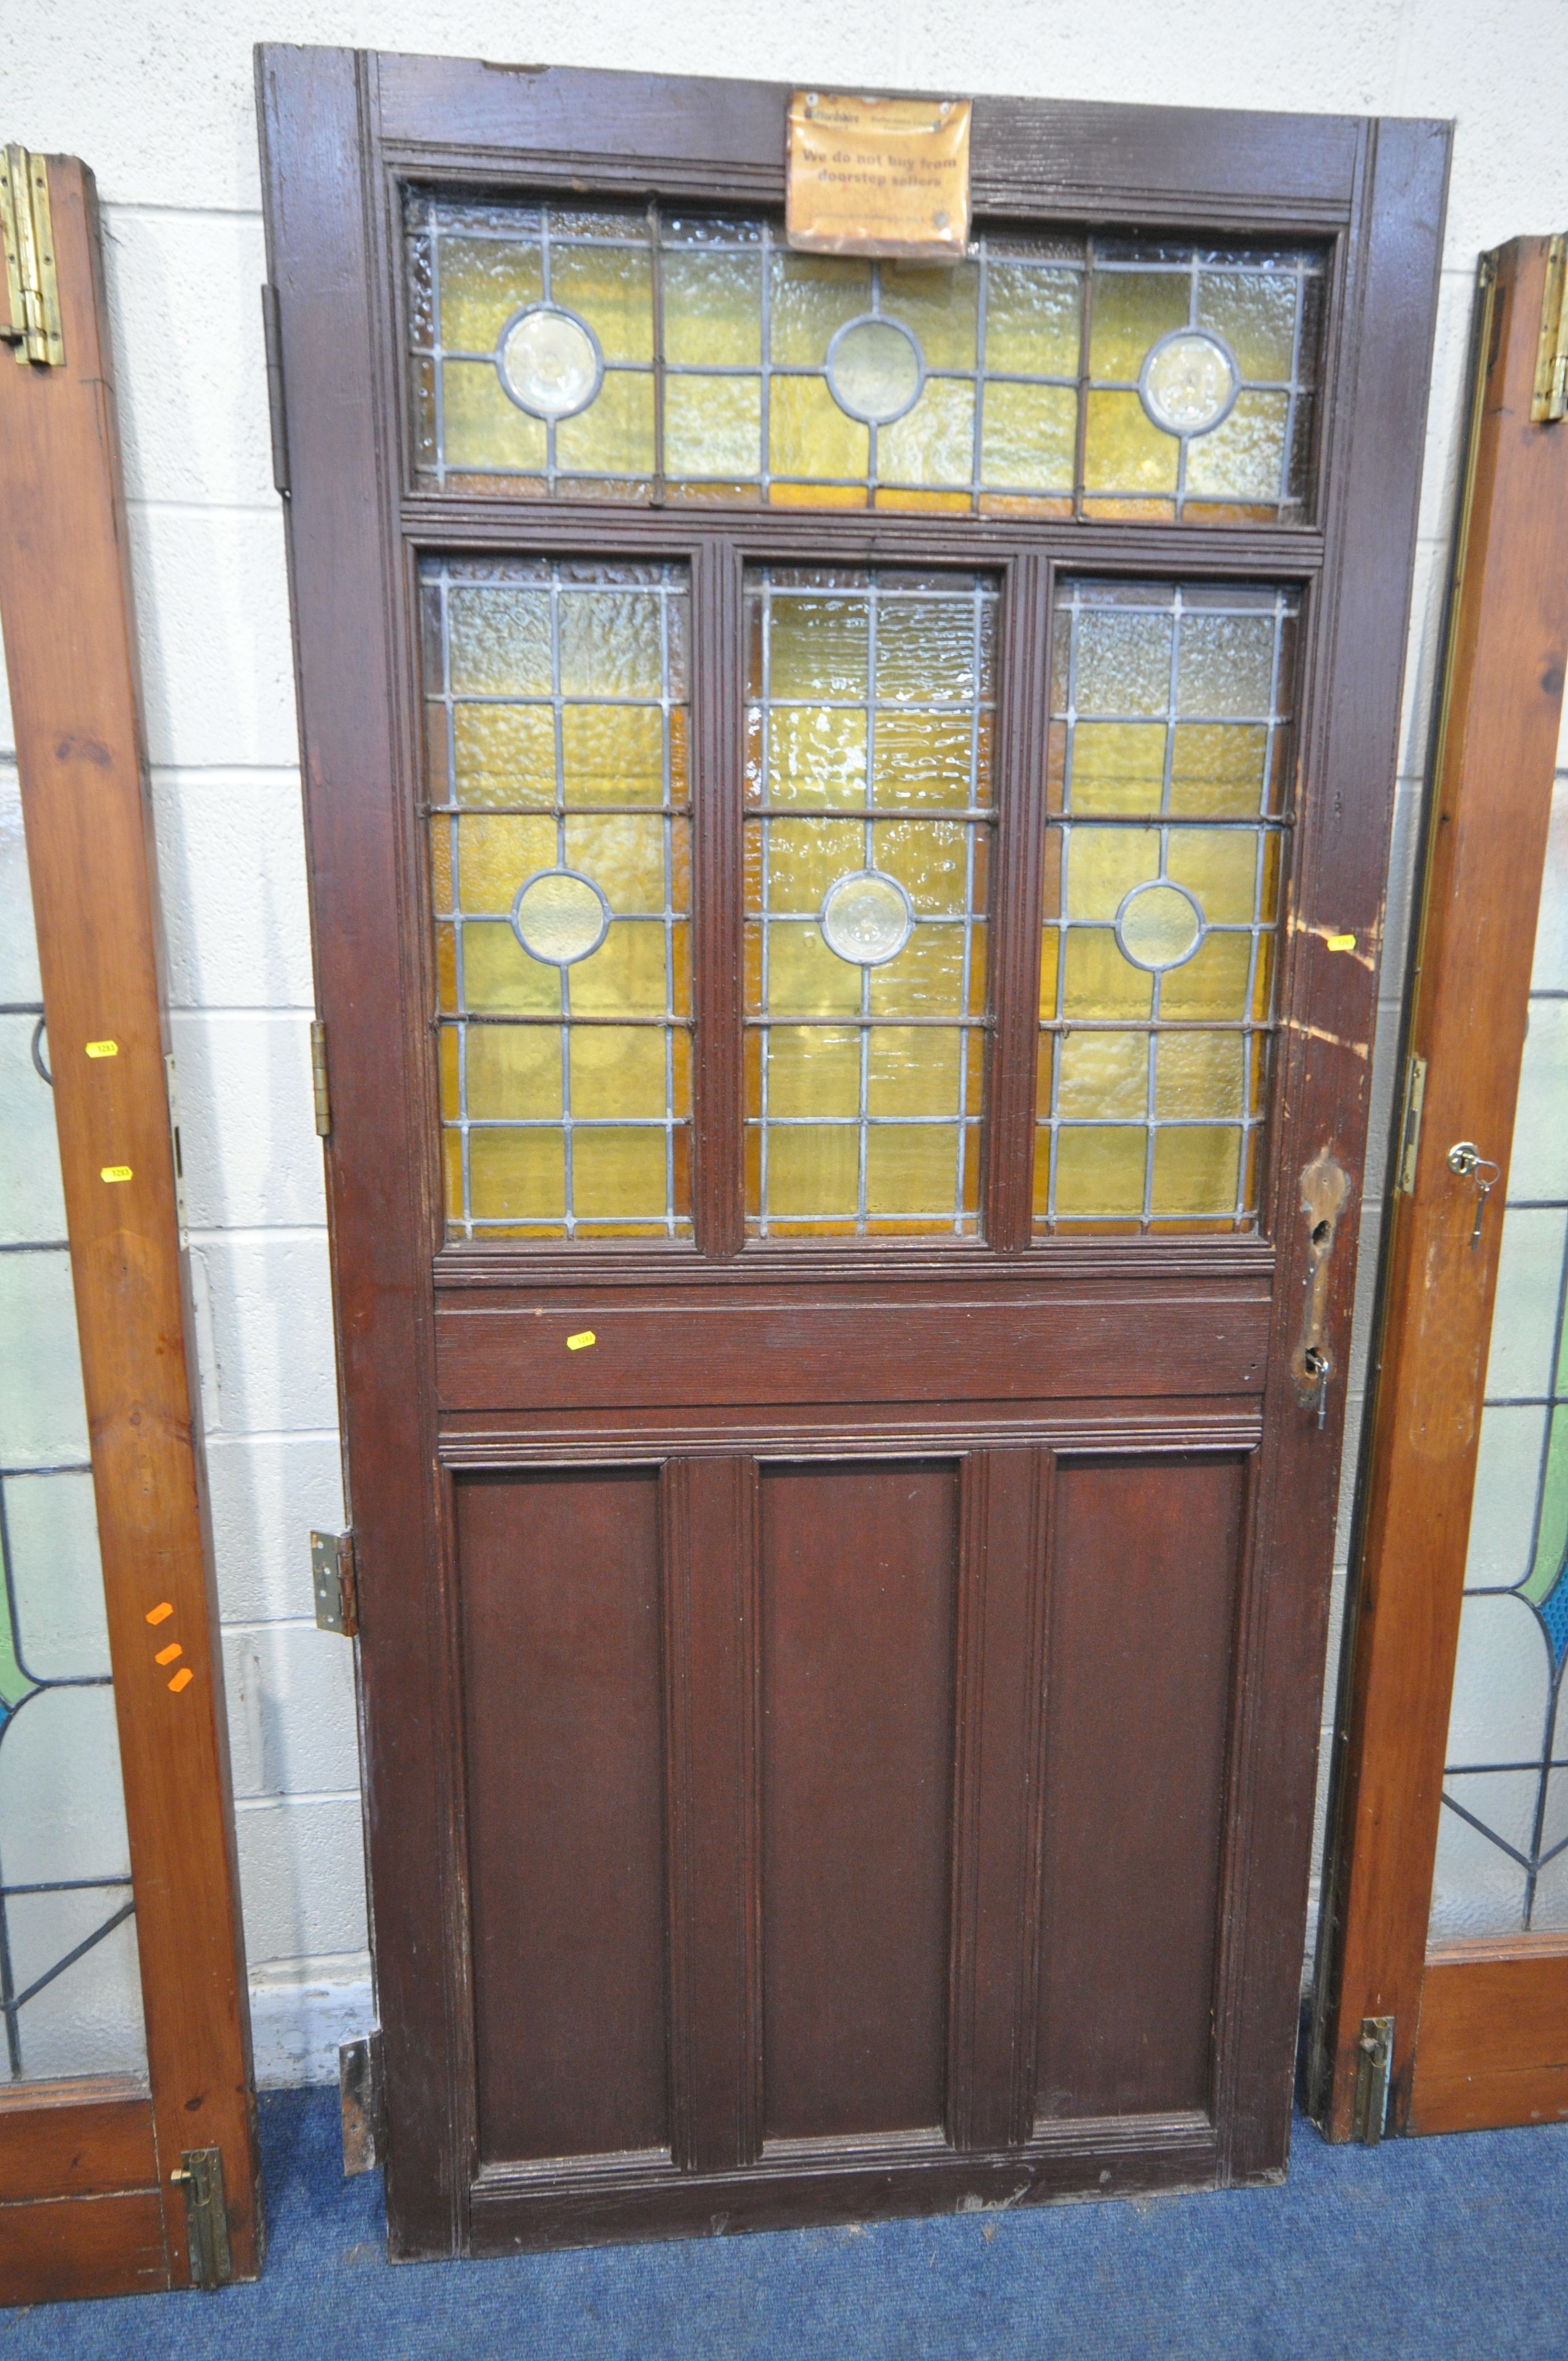 FOUR SIZED INTERNAL DOORS, each with lead glazed stain glass windows, depicting various patterns and - Image 2 of 10